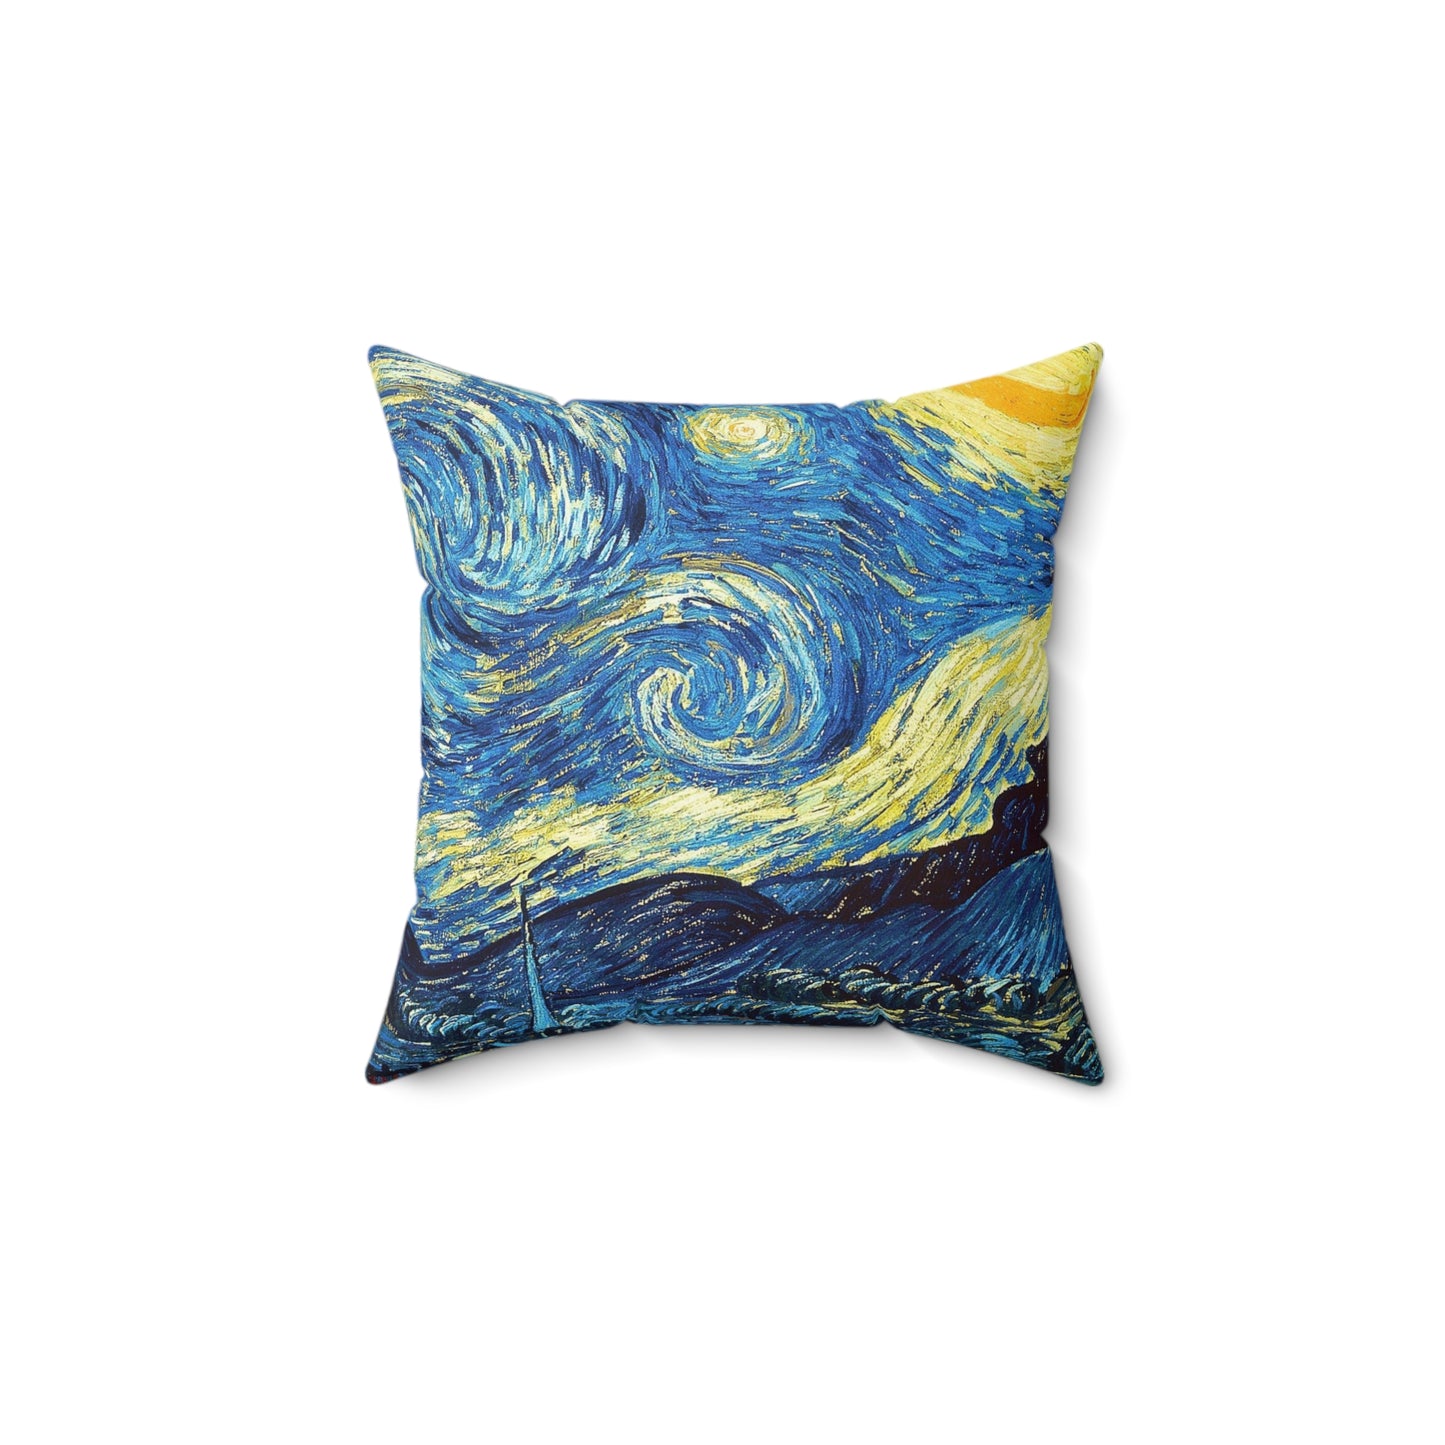 Starry Night Square Pillow